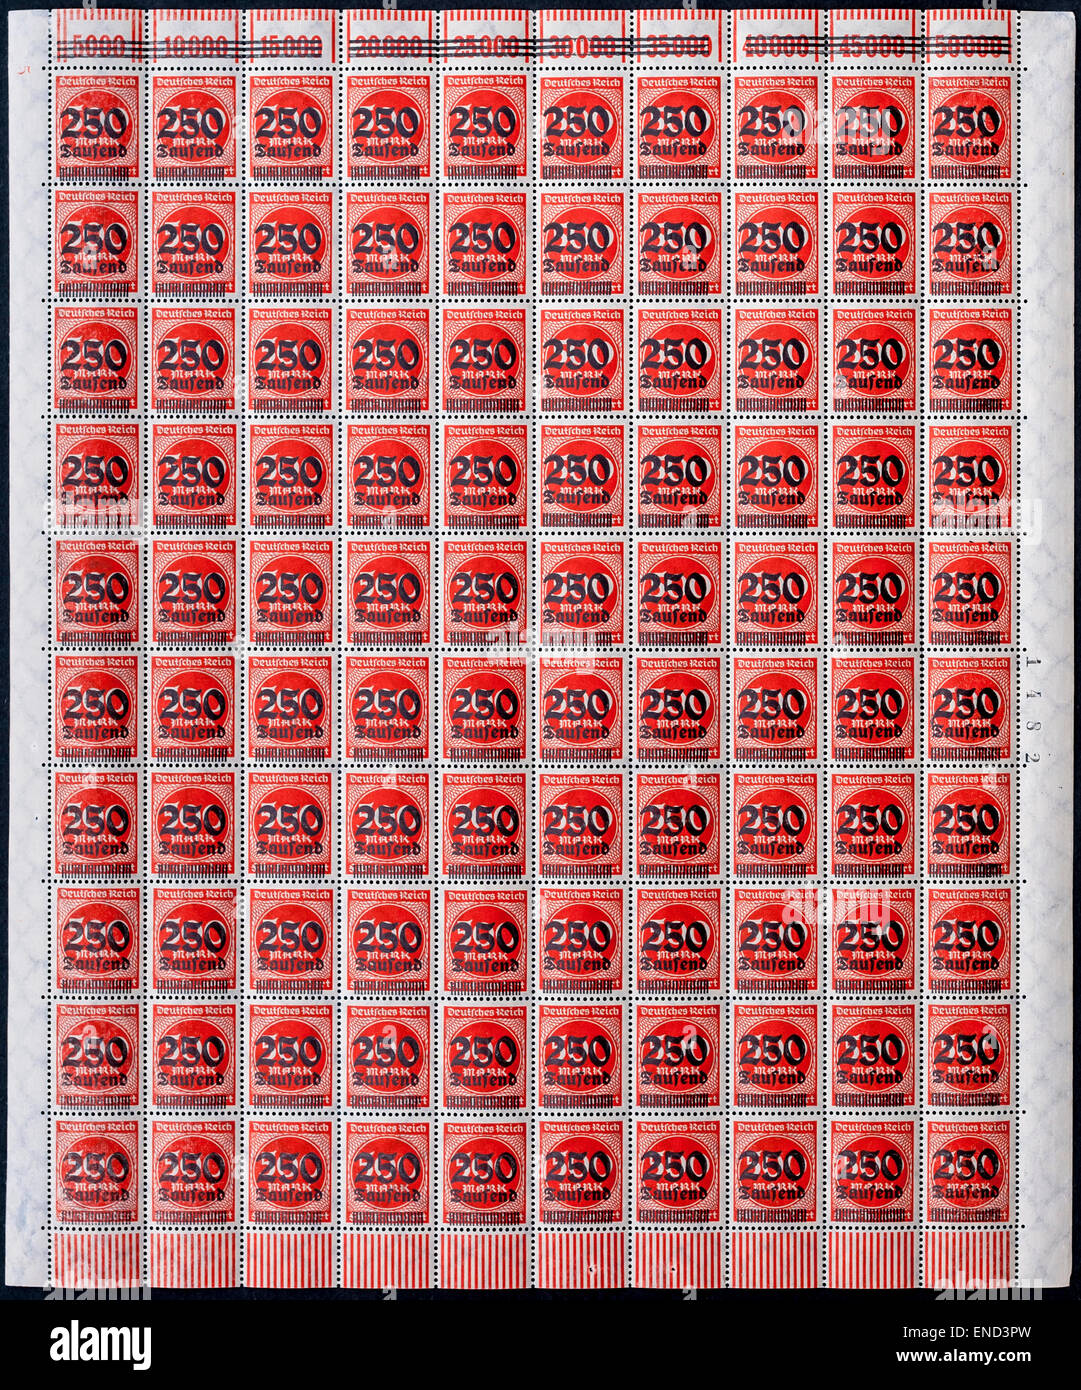 Complete sheet of 100 unused 1923 German 250,000 Mark overprinted “hyper-inflation” stamps - Germany. Stock Photo